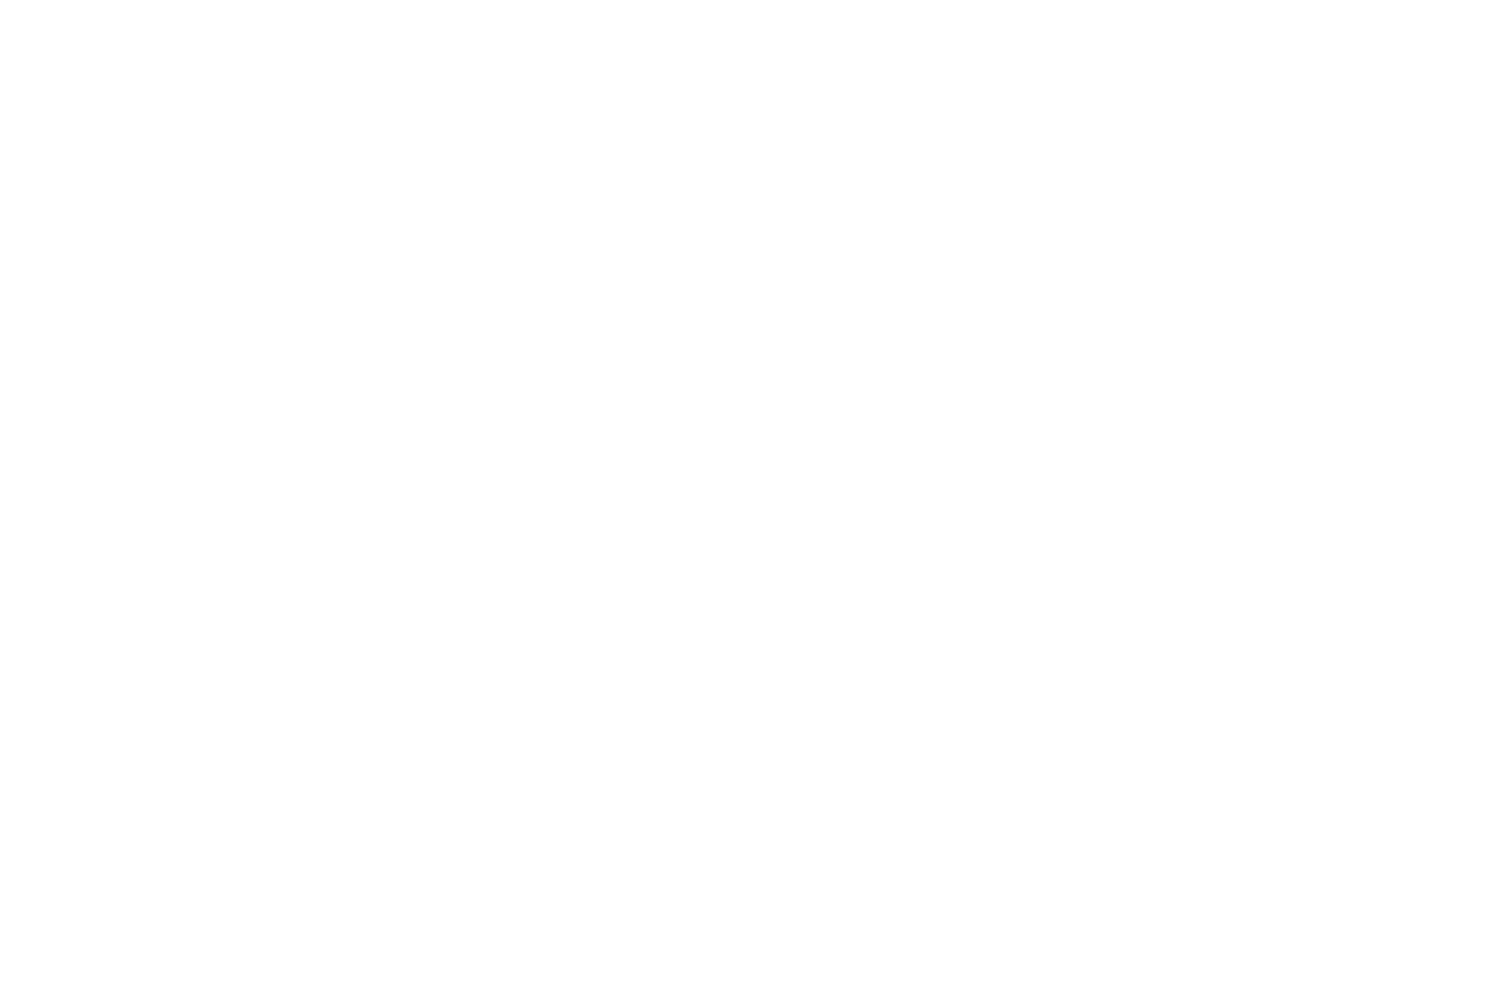 Willow Sicamous